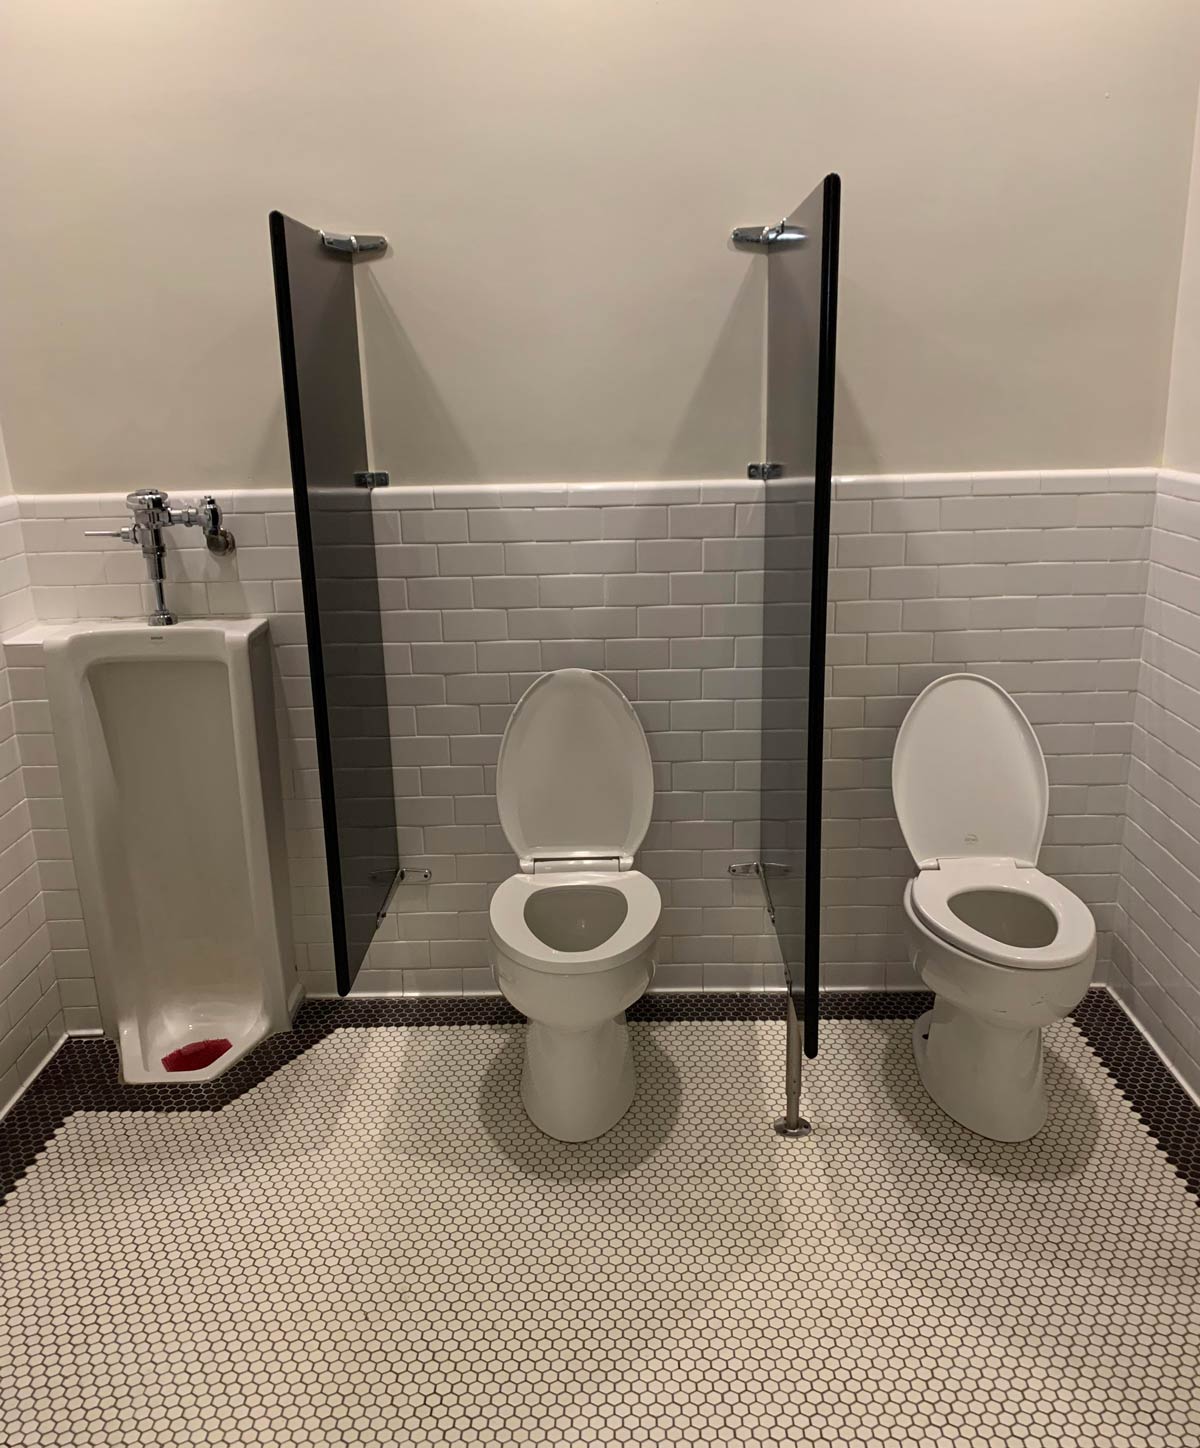 This lobby restroom at a nice (~$200/night) hotel and restaurant